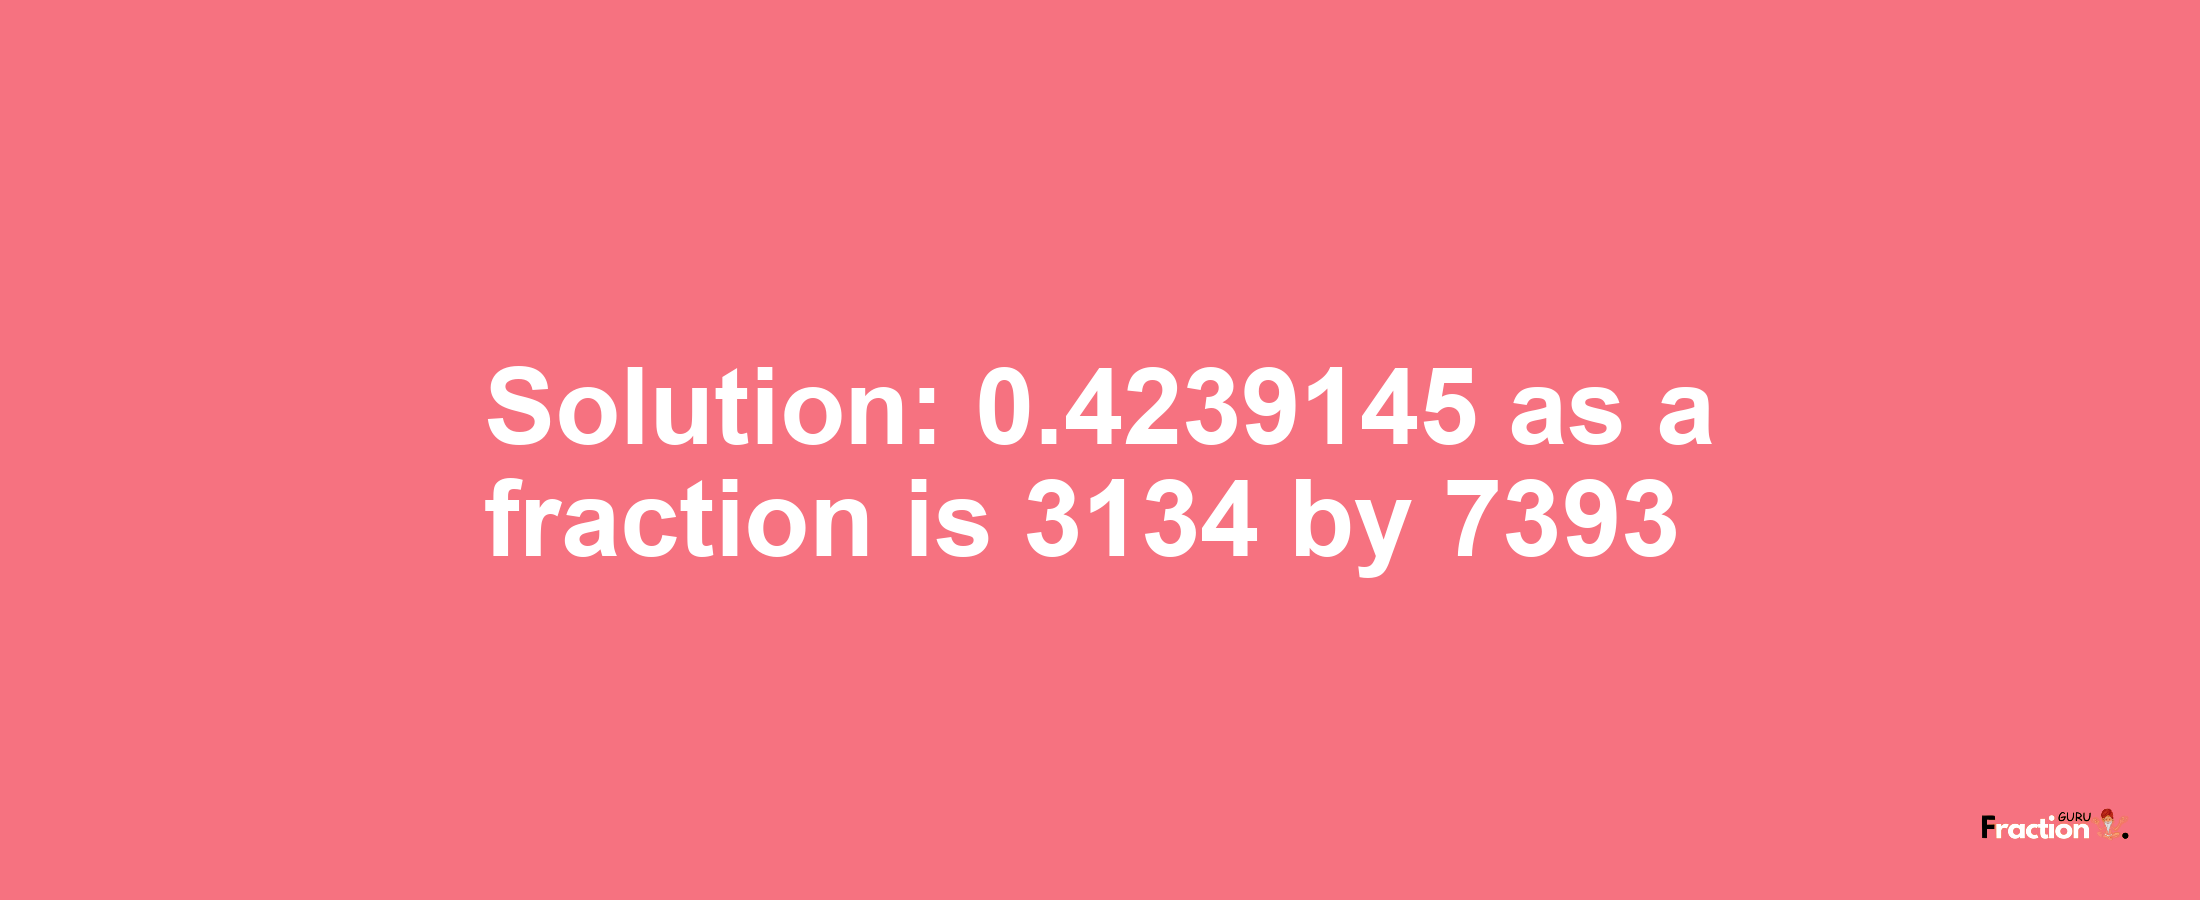 Solution:0.4239145 as a fraction is 3134/7393